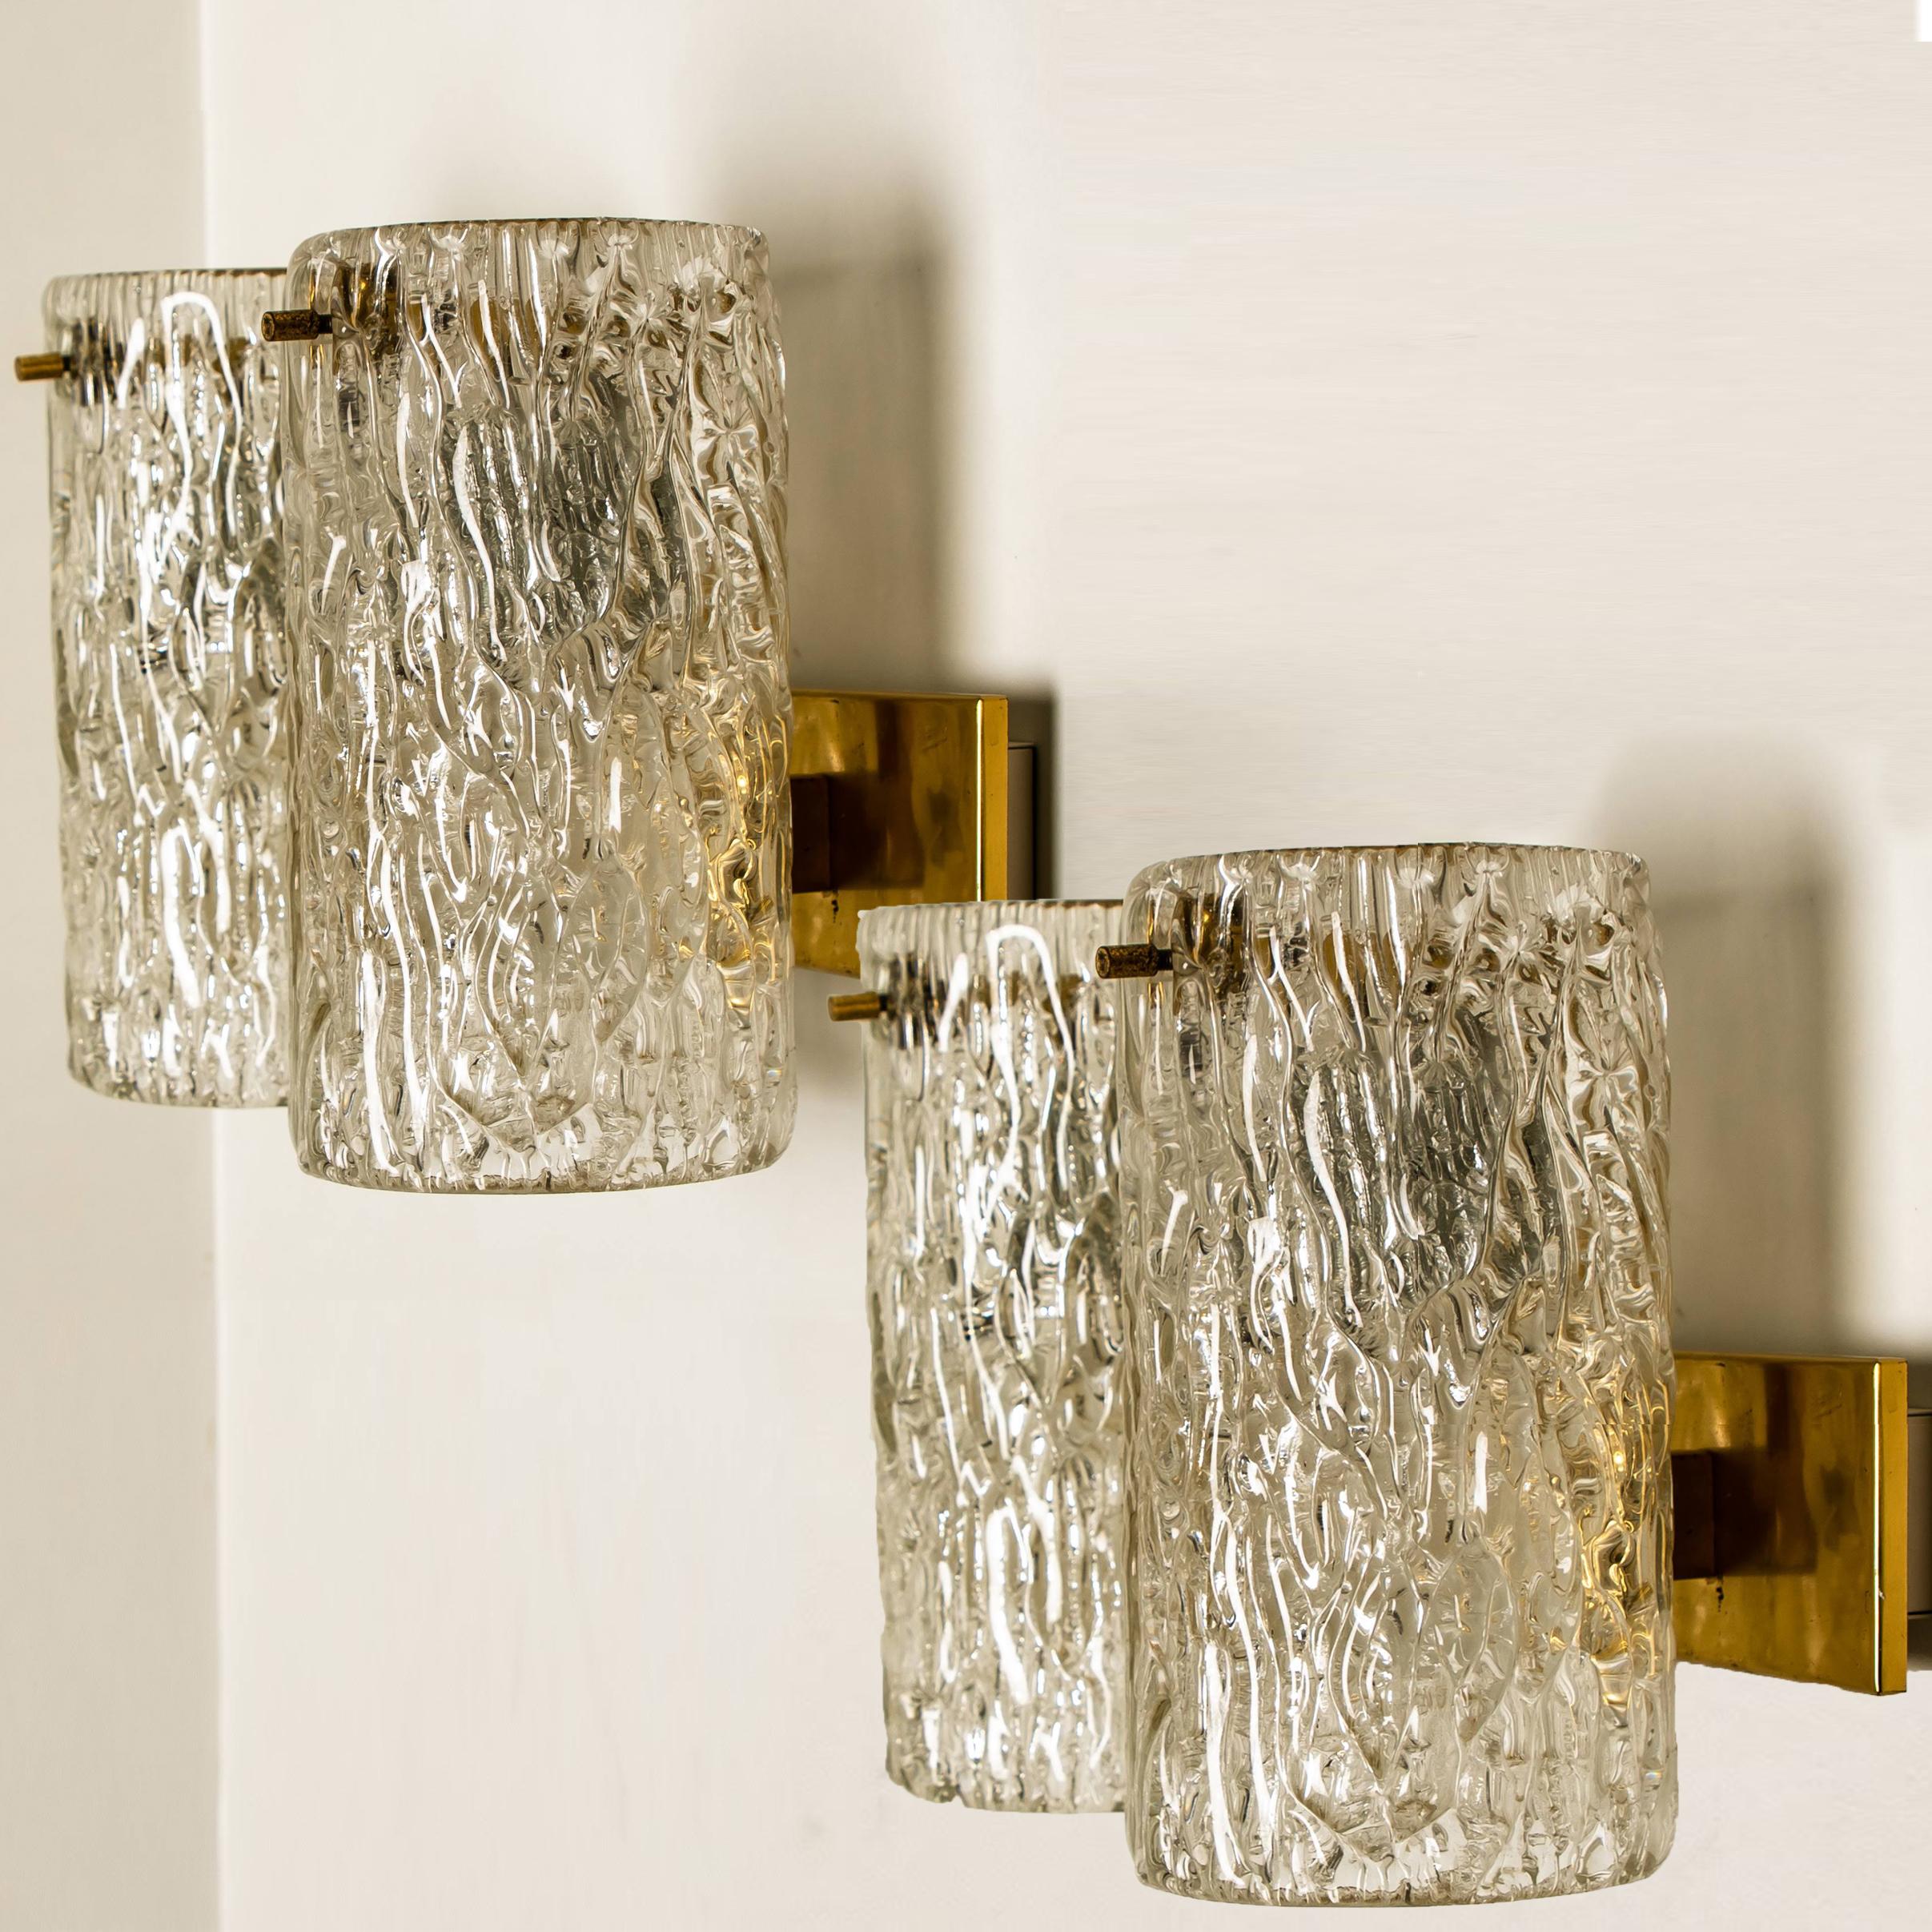 Mid-Century Modern Pair of Bubble Glass Sconces or Wall Sconces by Hillebrand, 1960s